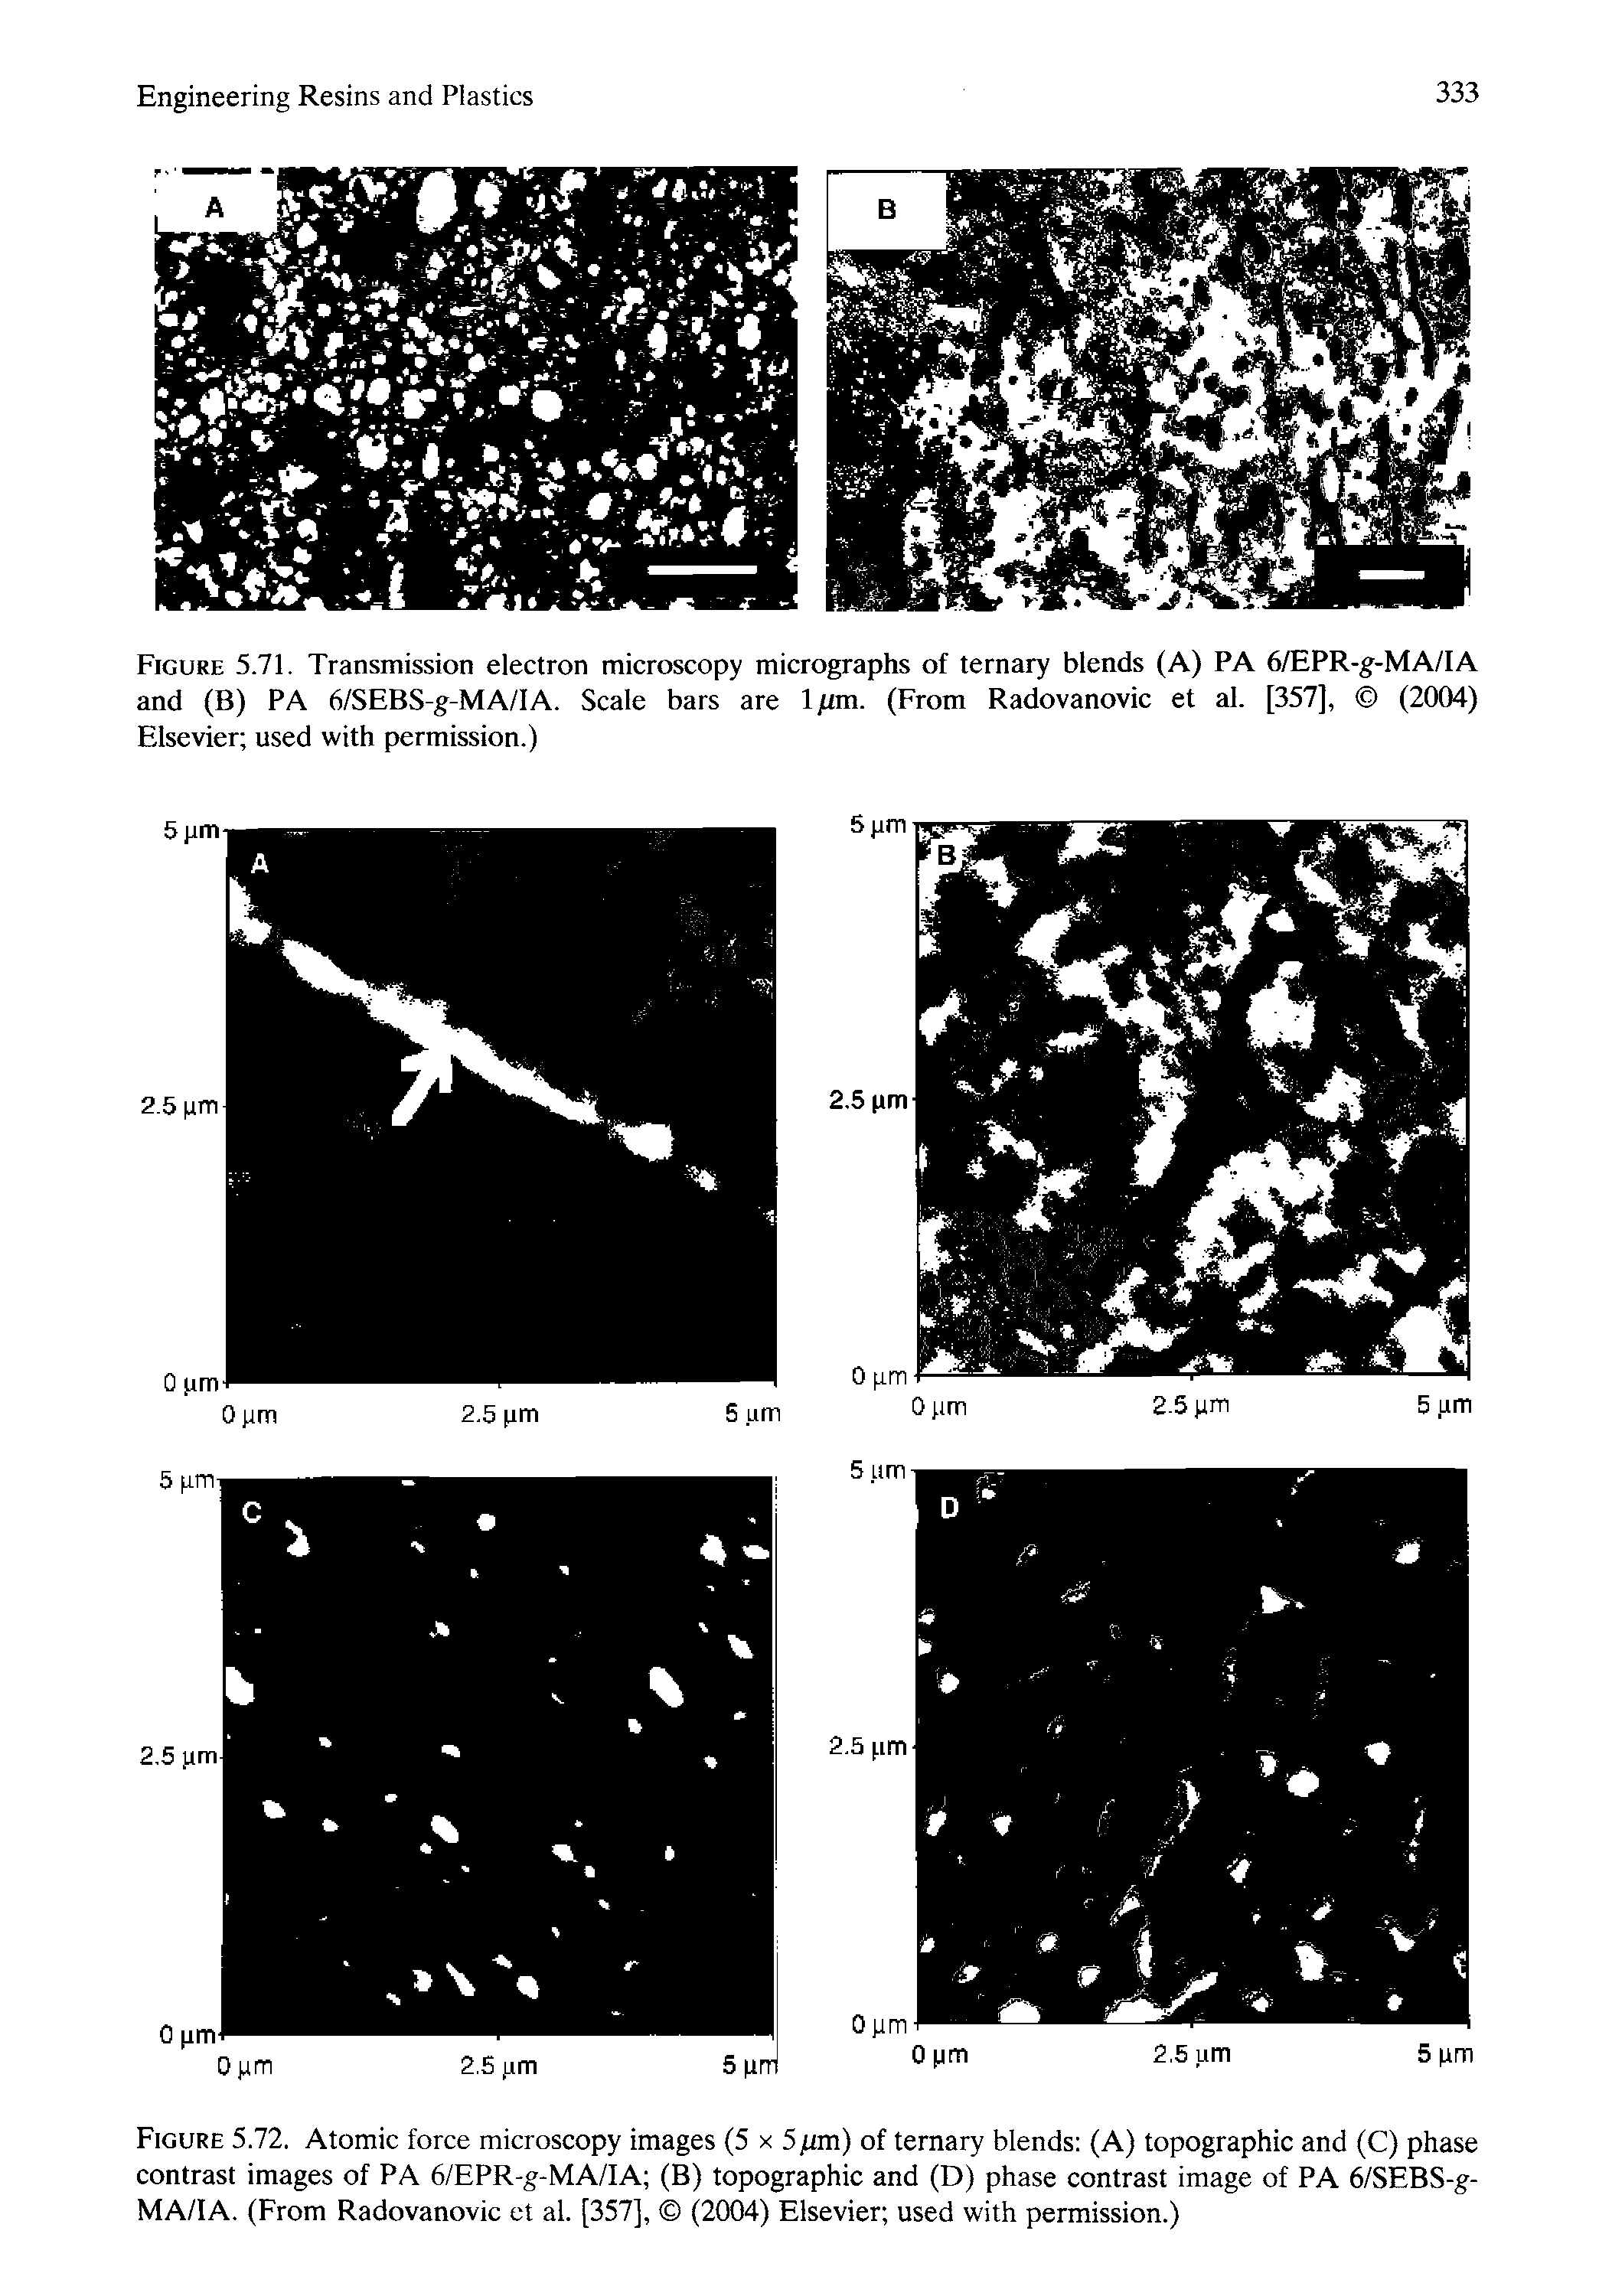 Figure 5.71. Transmission electron microscopy micrographs of ternary blends (A) PA 6/EPR-g-MA/IA and (B) PA 6/SEBS-g-MA/IA. Scale bars are l rni. (From Radovanovic et al. [357], (2004) Elsevier used with permission.)...